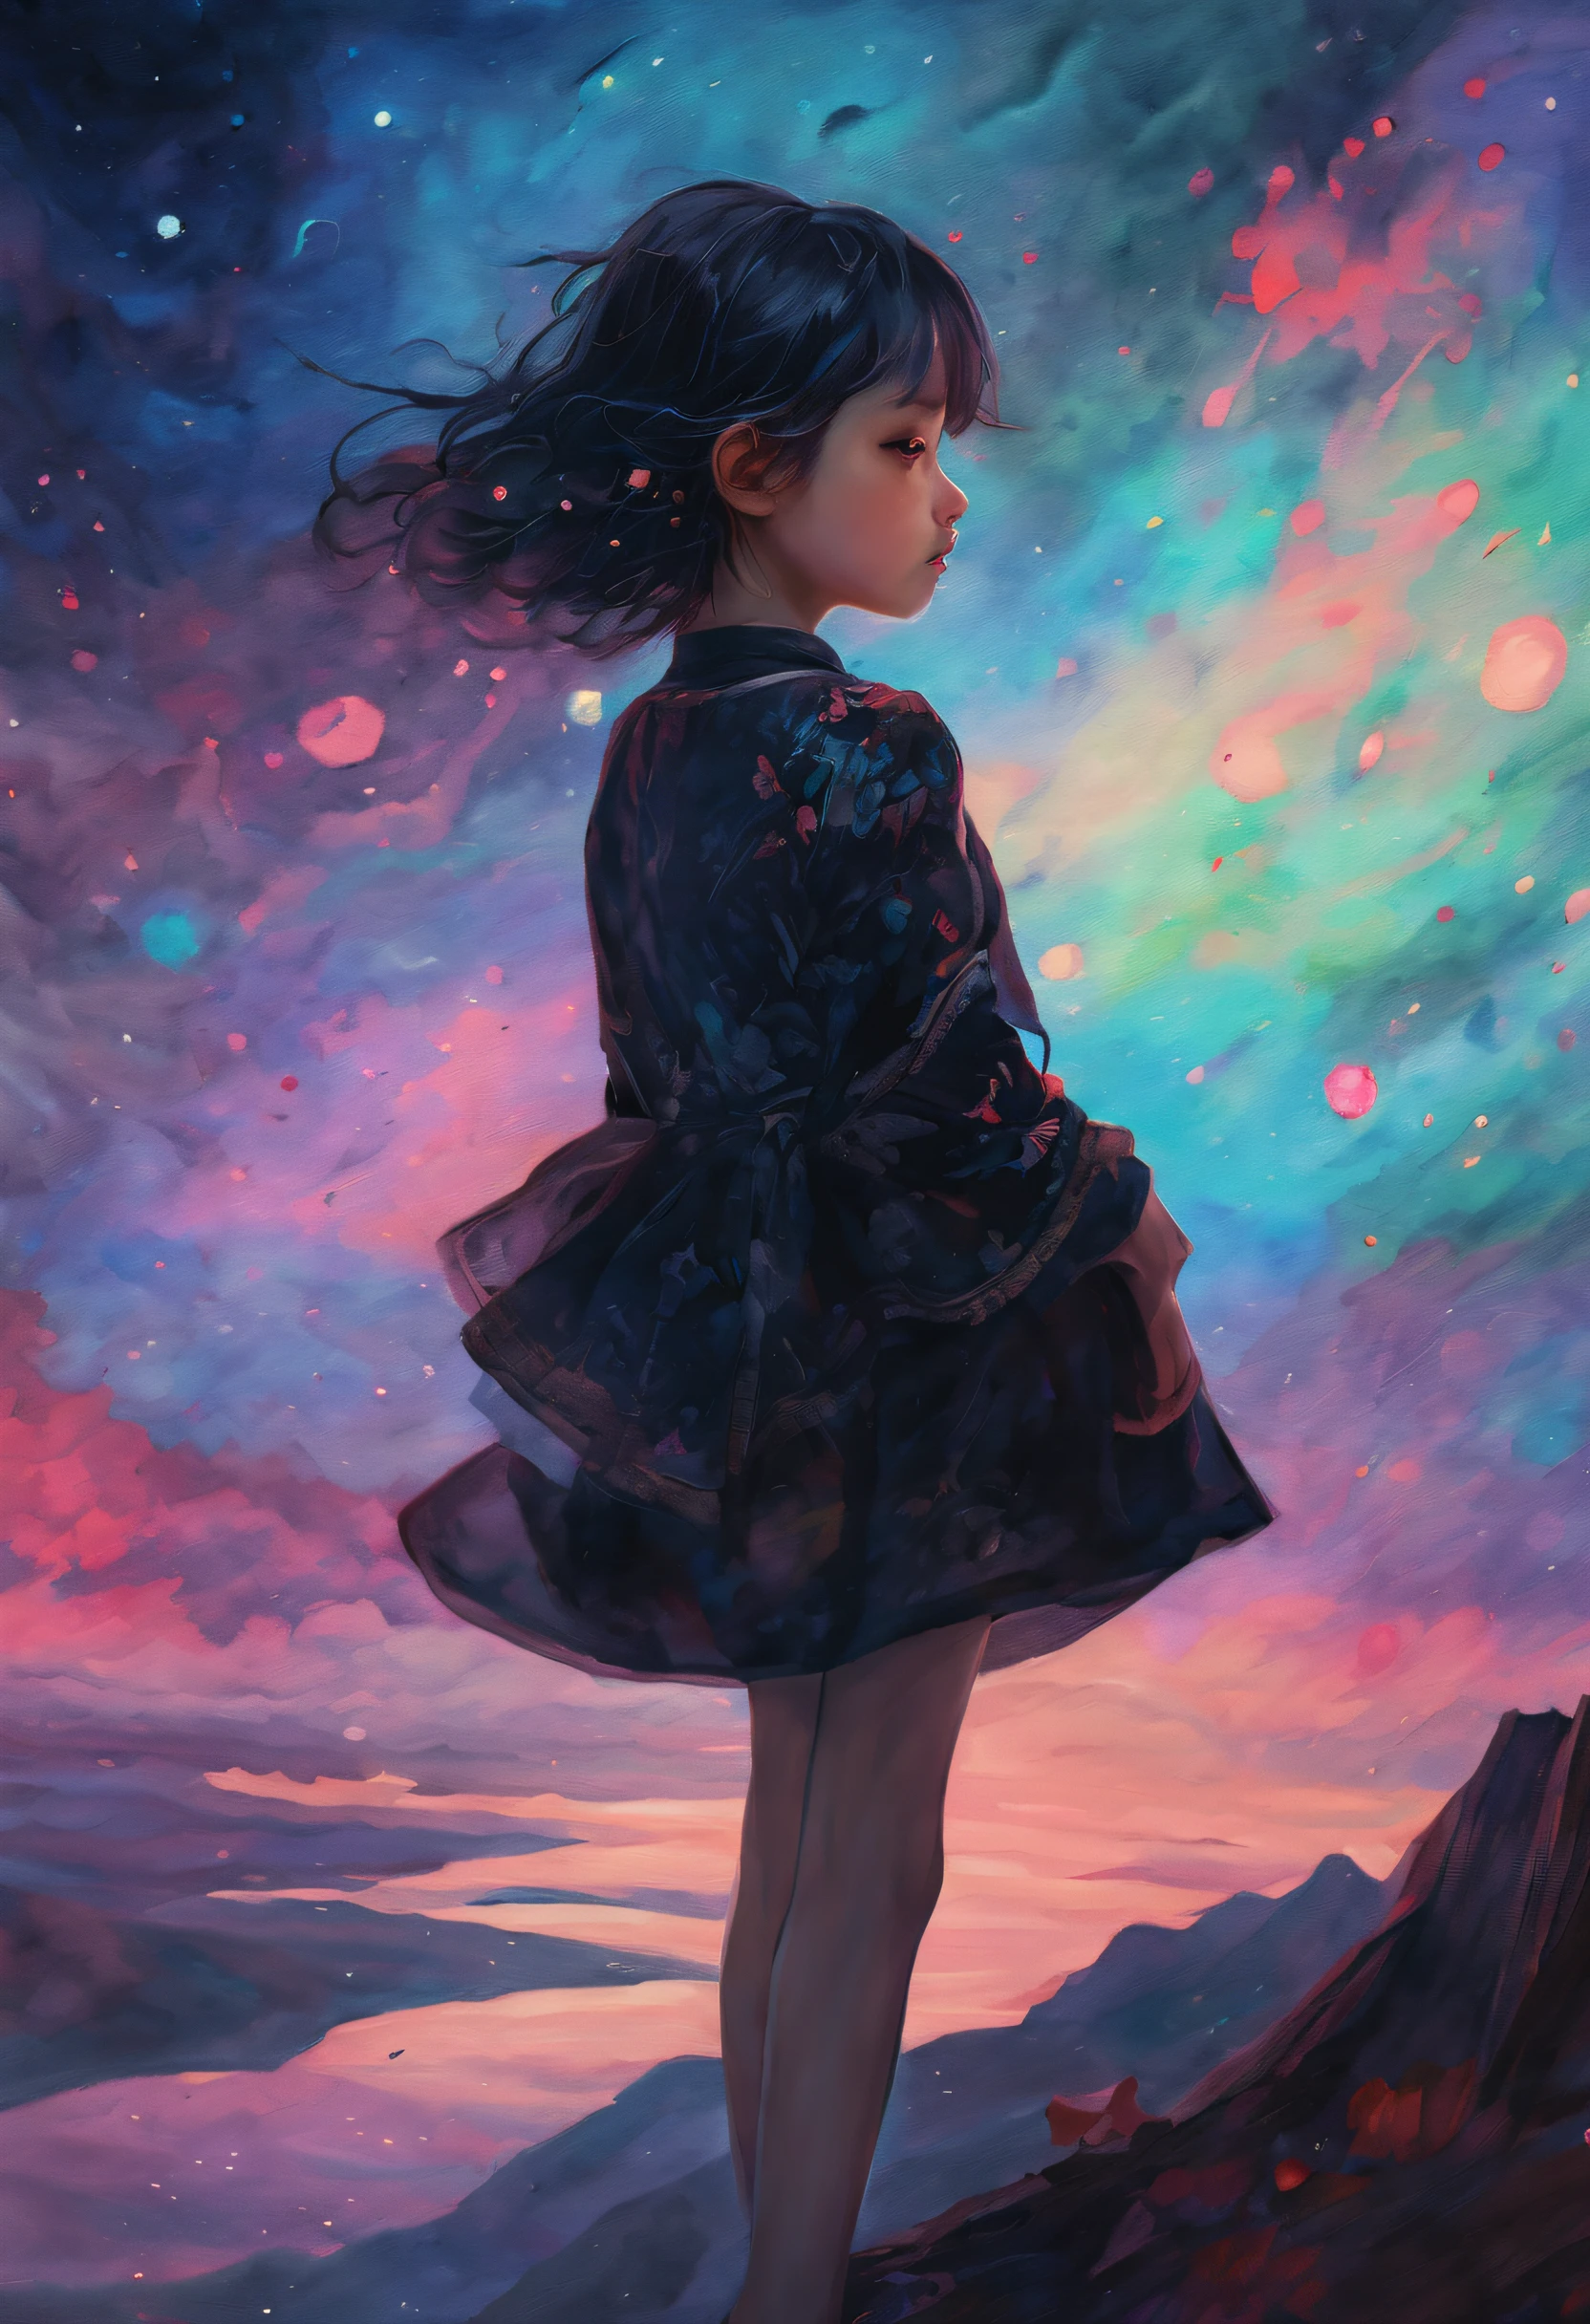 [Young 1girl, Cute Black Chaos Bob To The Wind, baroque:20]:BG[Nebula IC434] (Art by Slawomir-Maniak), Lush watercolor palette canvas/acrylic, Intricate, Extreme detailing, Complex key, ((Single Shot)), ((Best Quality)), ((Masterpiece)) , ( (Realistic)), (IDEAL), 8K, impressionism: 0.2 Обои Full HD